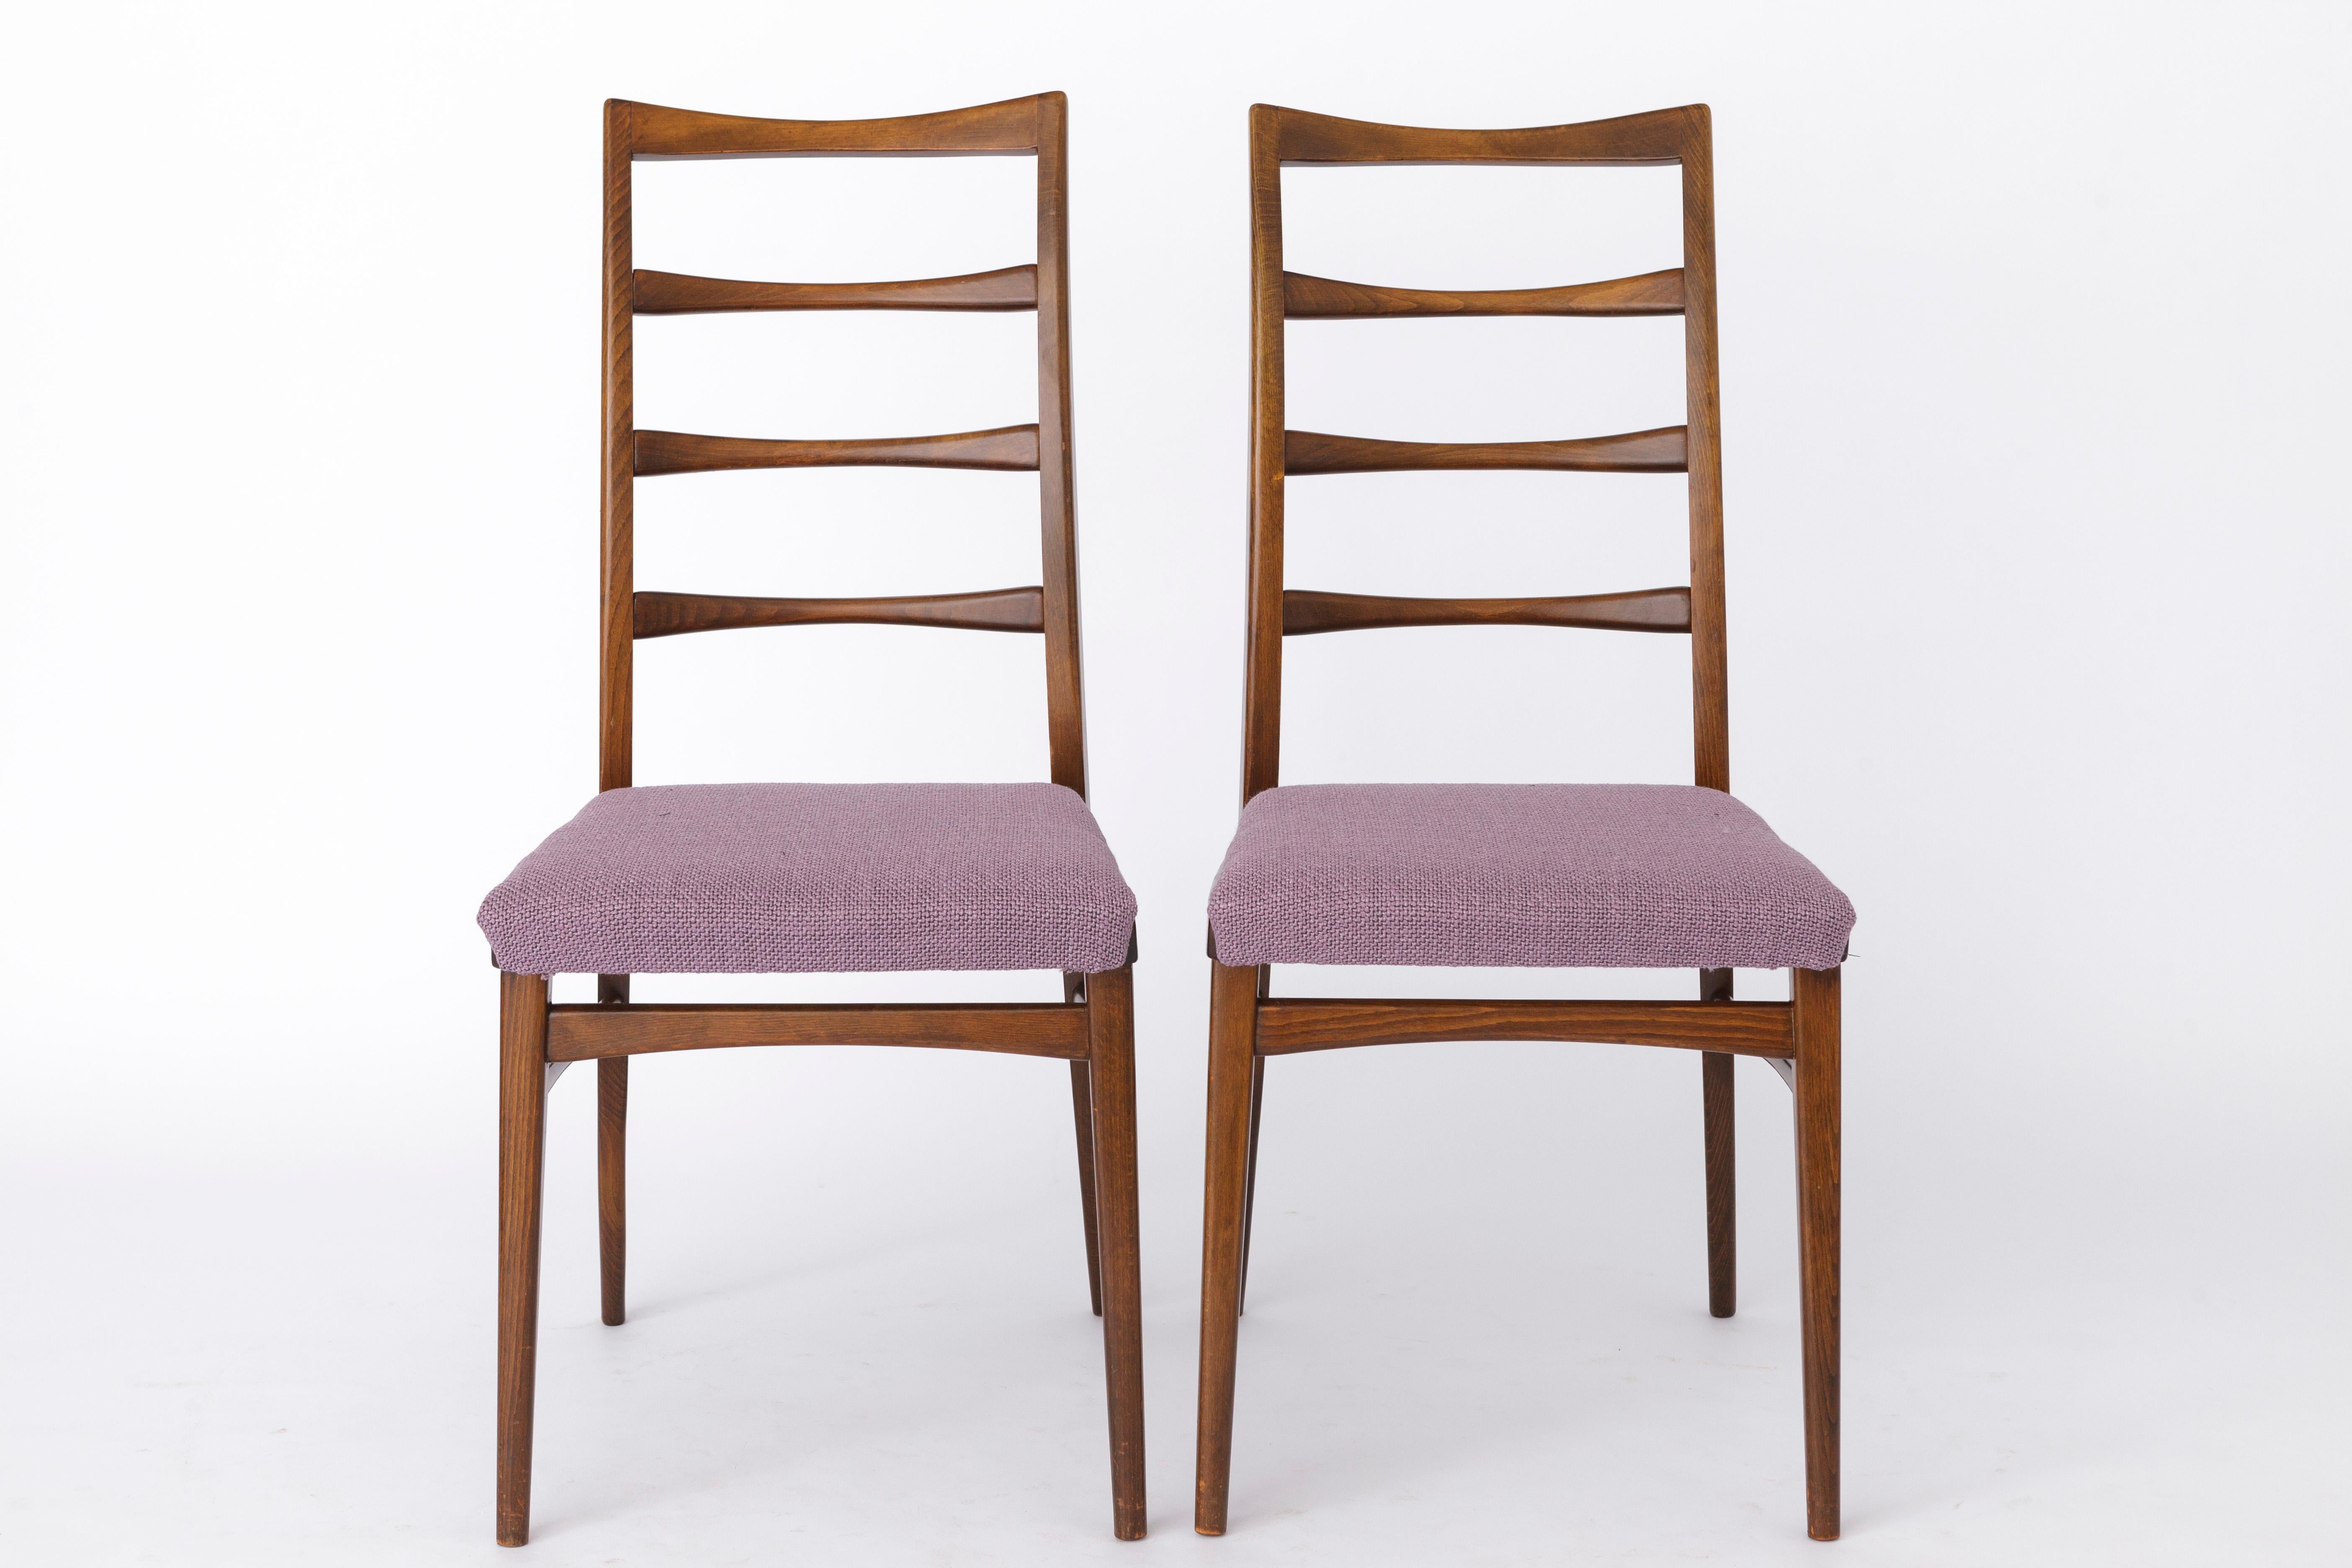 2 Vintage chairs. German origin. 
Production period: approx. 1950s-1960s. 
Unknown designer or manufacturer. 
Displayed price is for a pair. Totally up to 6 chairs (3 pairs) available. 

Sturdy dyed beech wood frame. Refurbished and oiled.